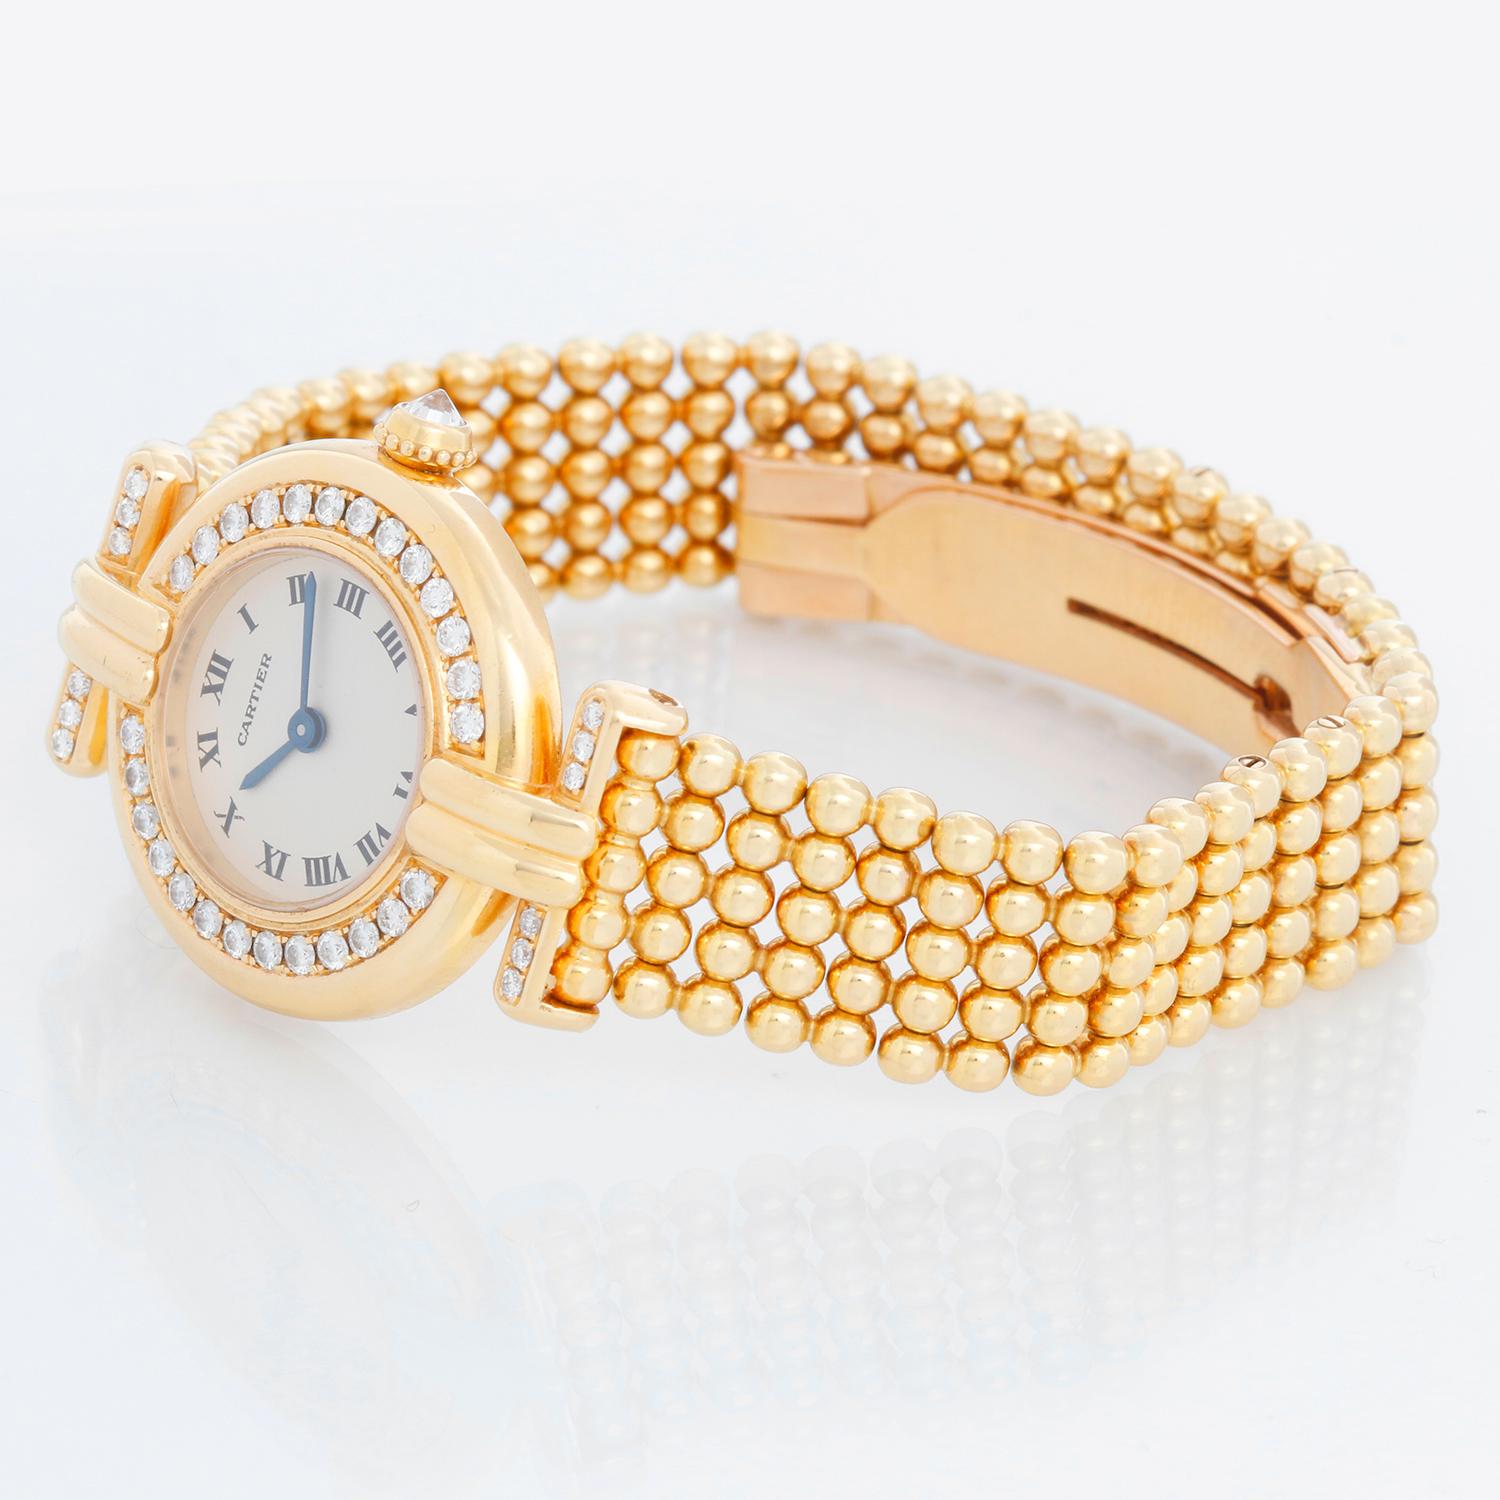 Cartier 18k Yellow Gold Ladies Colisee Diamond Watch - Quartz. 18k yellow gold case (24mm) with factory diamond bezel and lugs. Ivory dial with Roman numerals. 18k gold bead link Cartier bracelet with deployant; this will fit a 6 inch wrist .